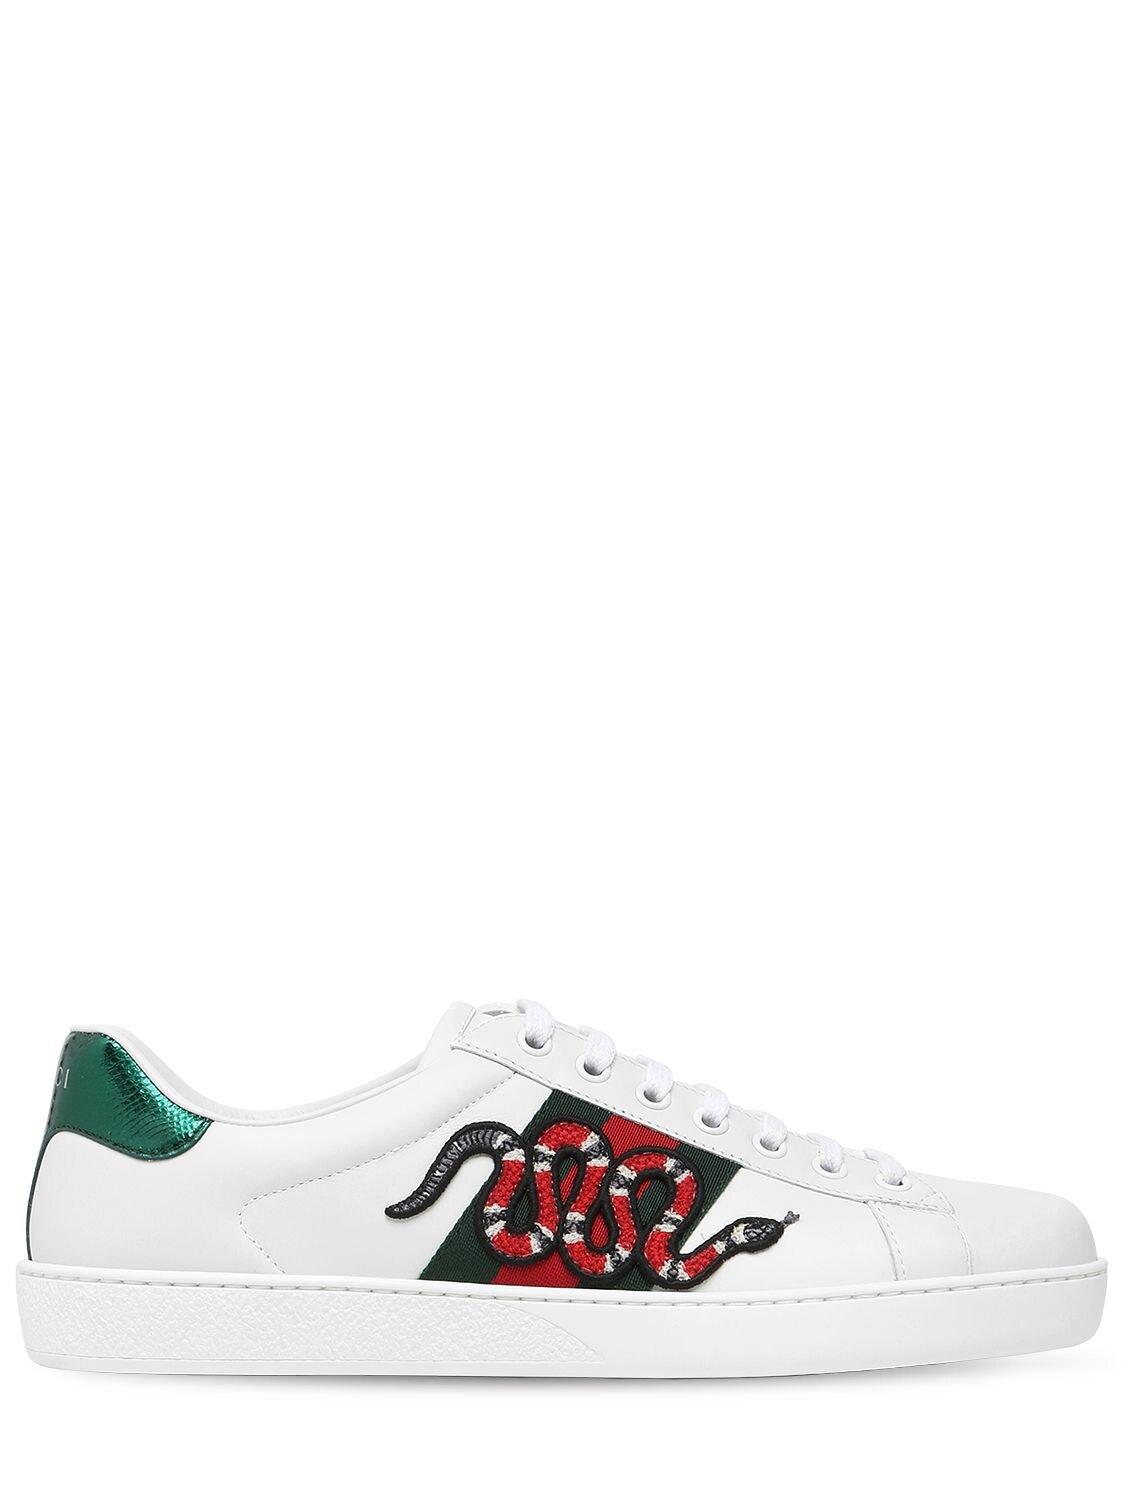 Gucci Leather Ace Embroidered Sneaker in White for Men - Save 43% - Lyst